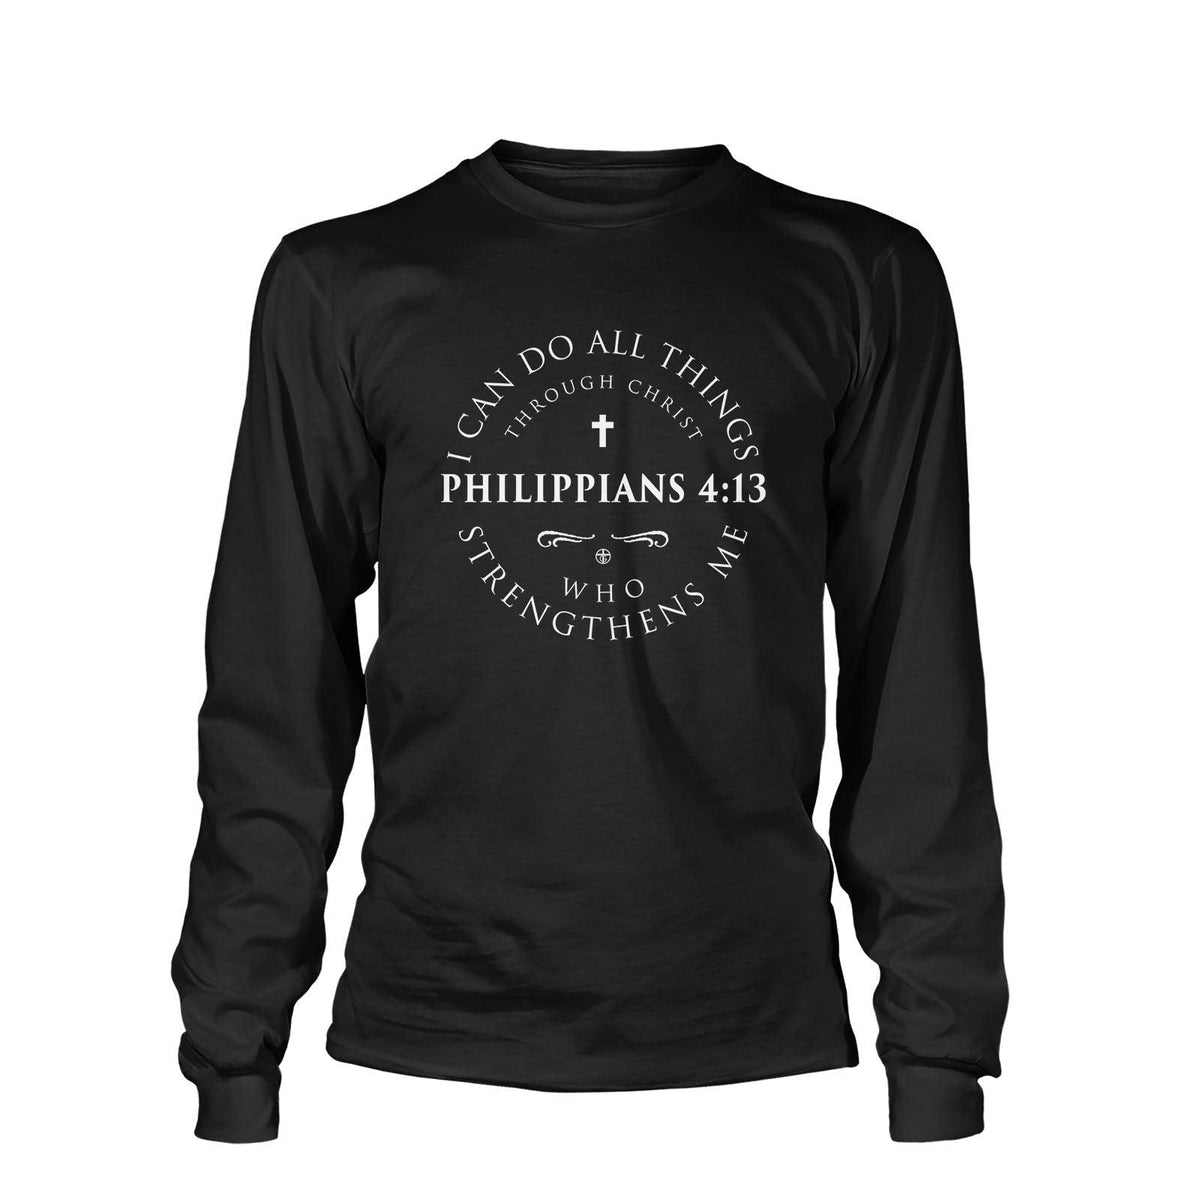 Philippians 4:13 Long Sleeves - Our True God